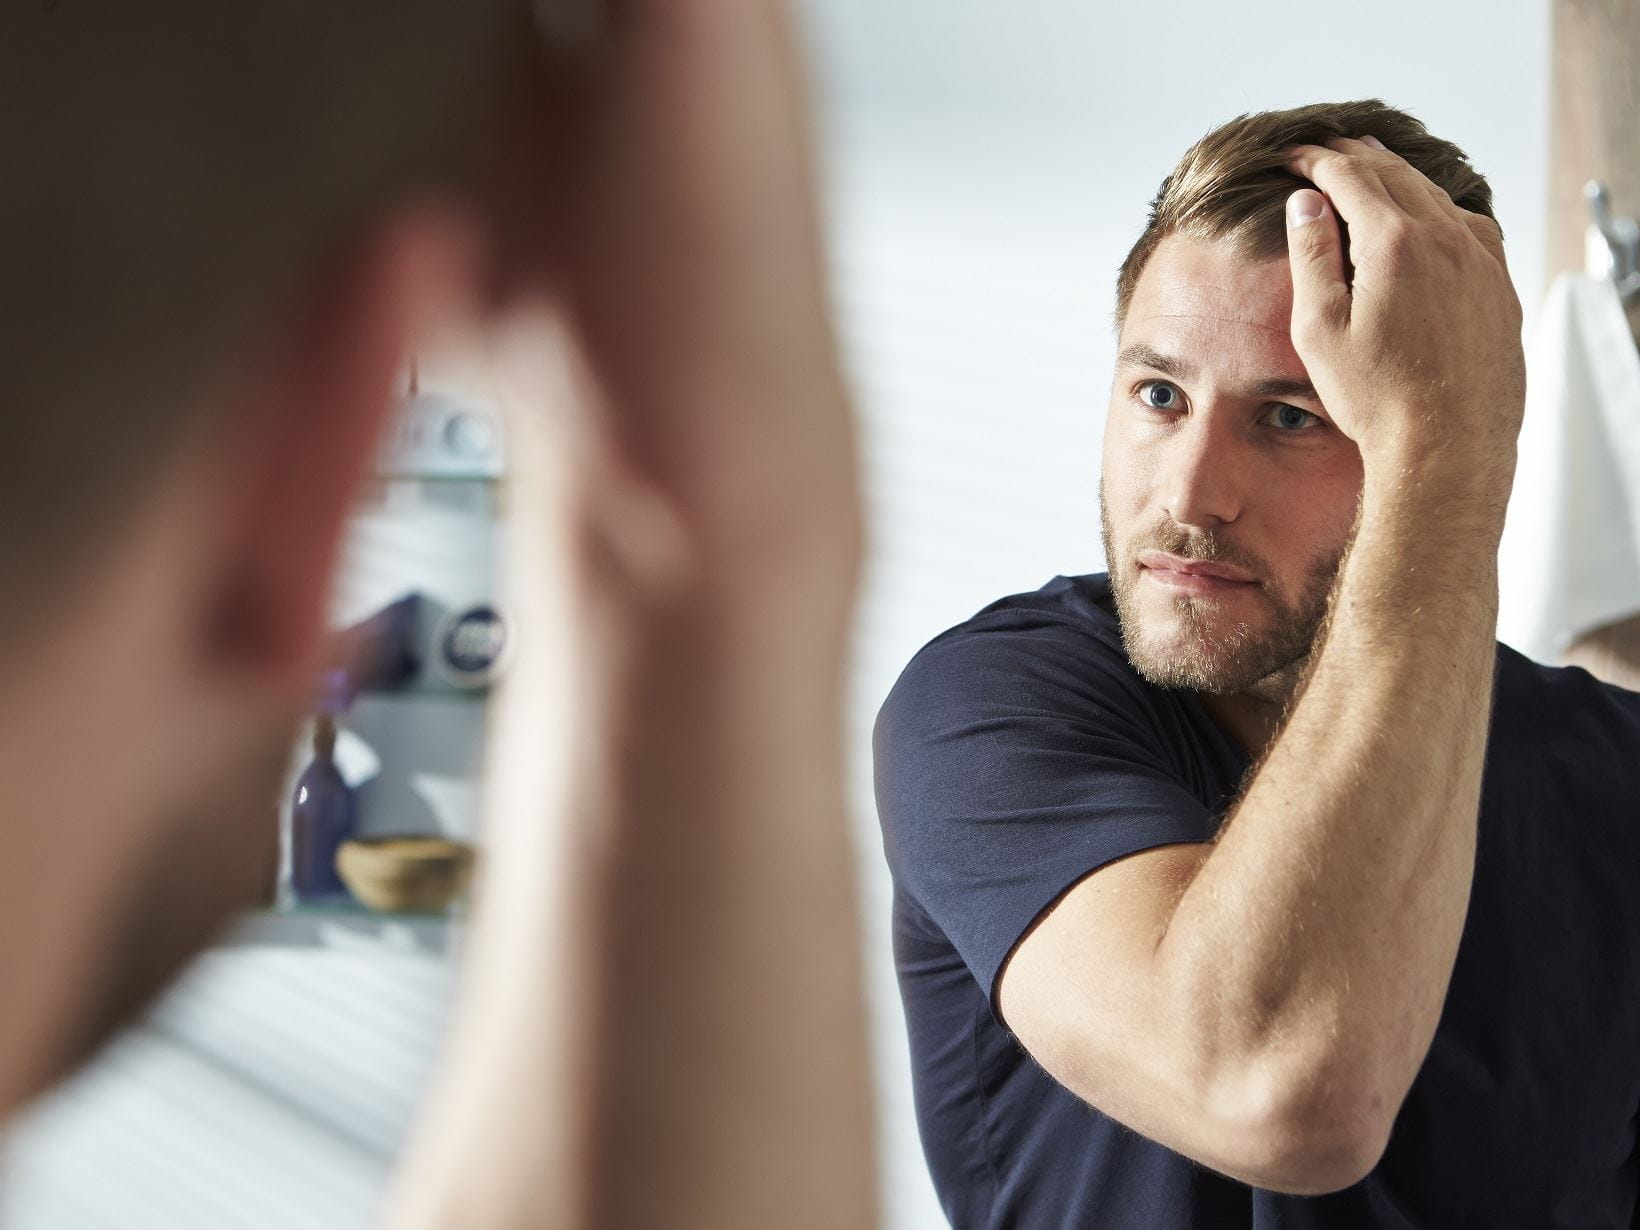 blonde haired man getting rid of his dandruff in front of a mirror